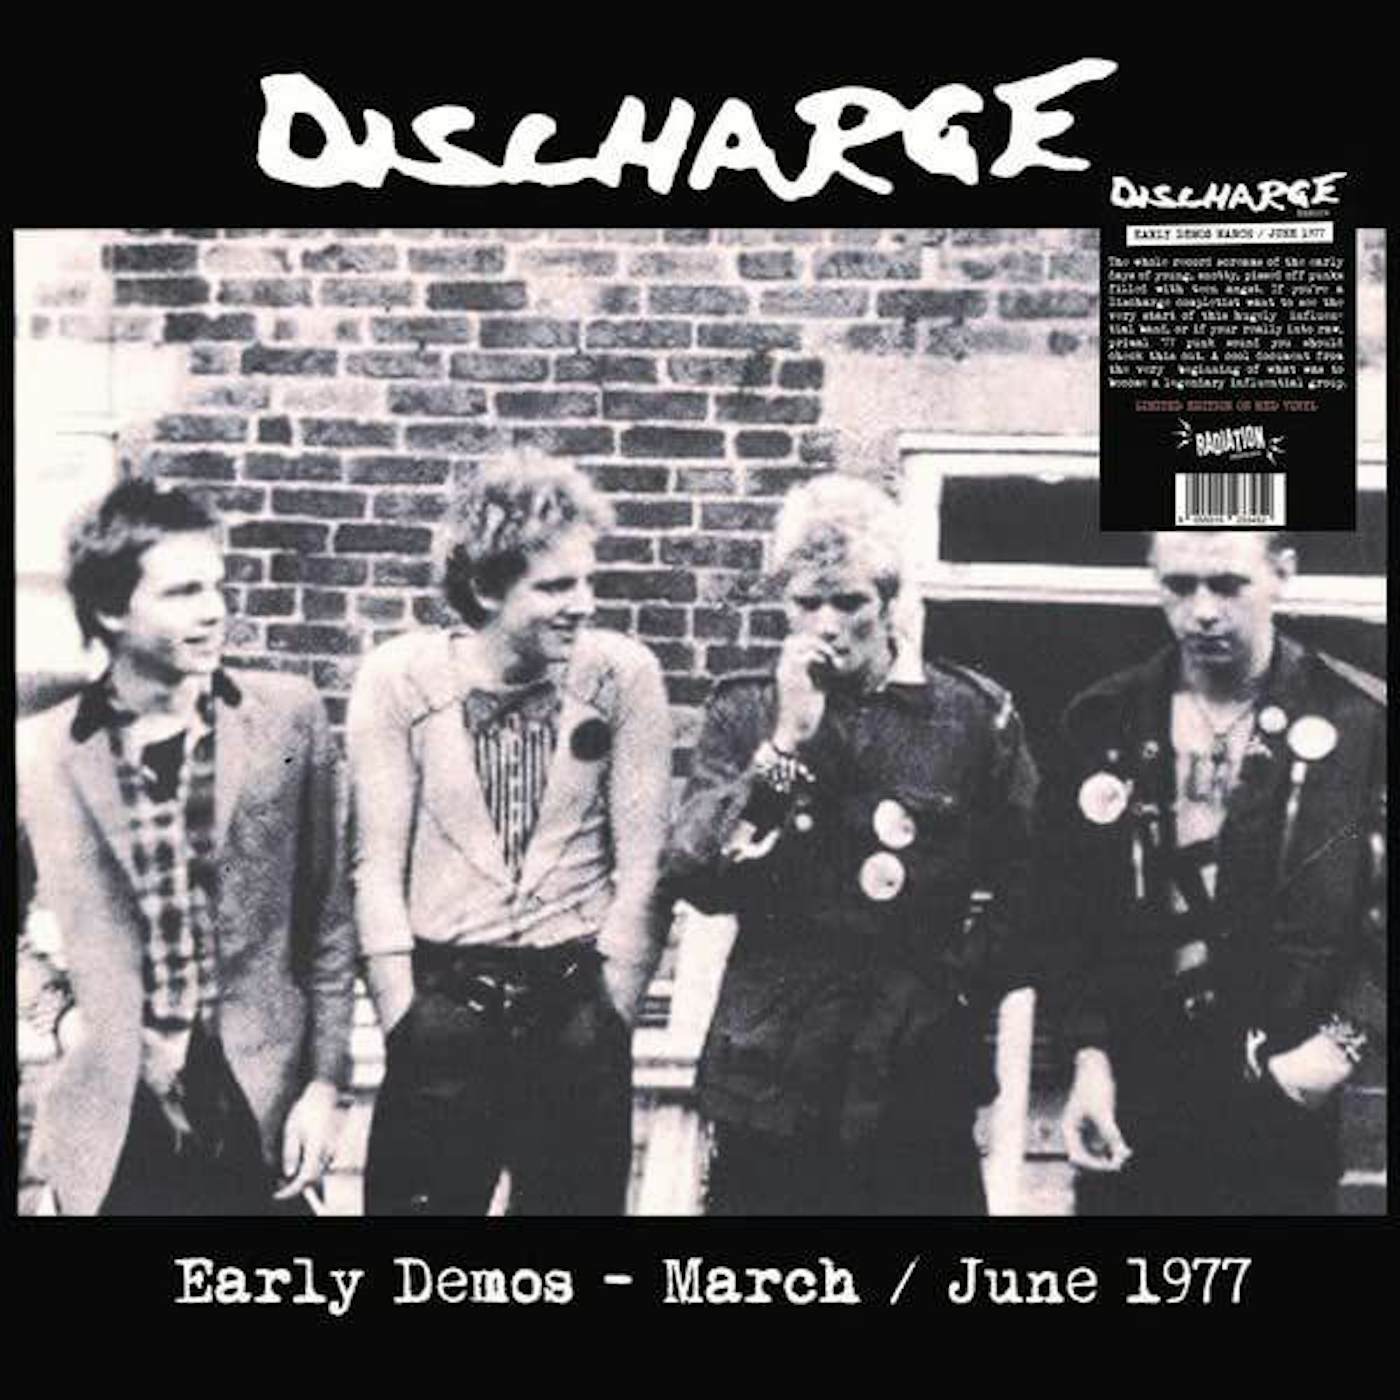 Discharge EARLY DEMOS - MARCH/JUNE 1977 Vinyl Record